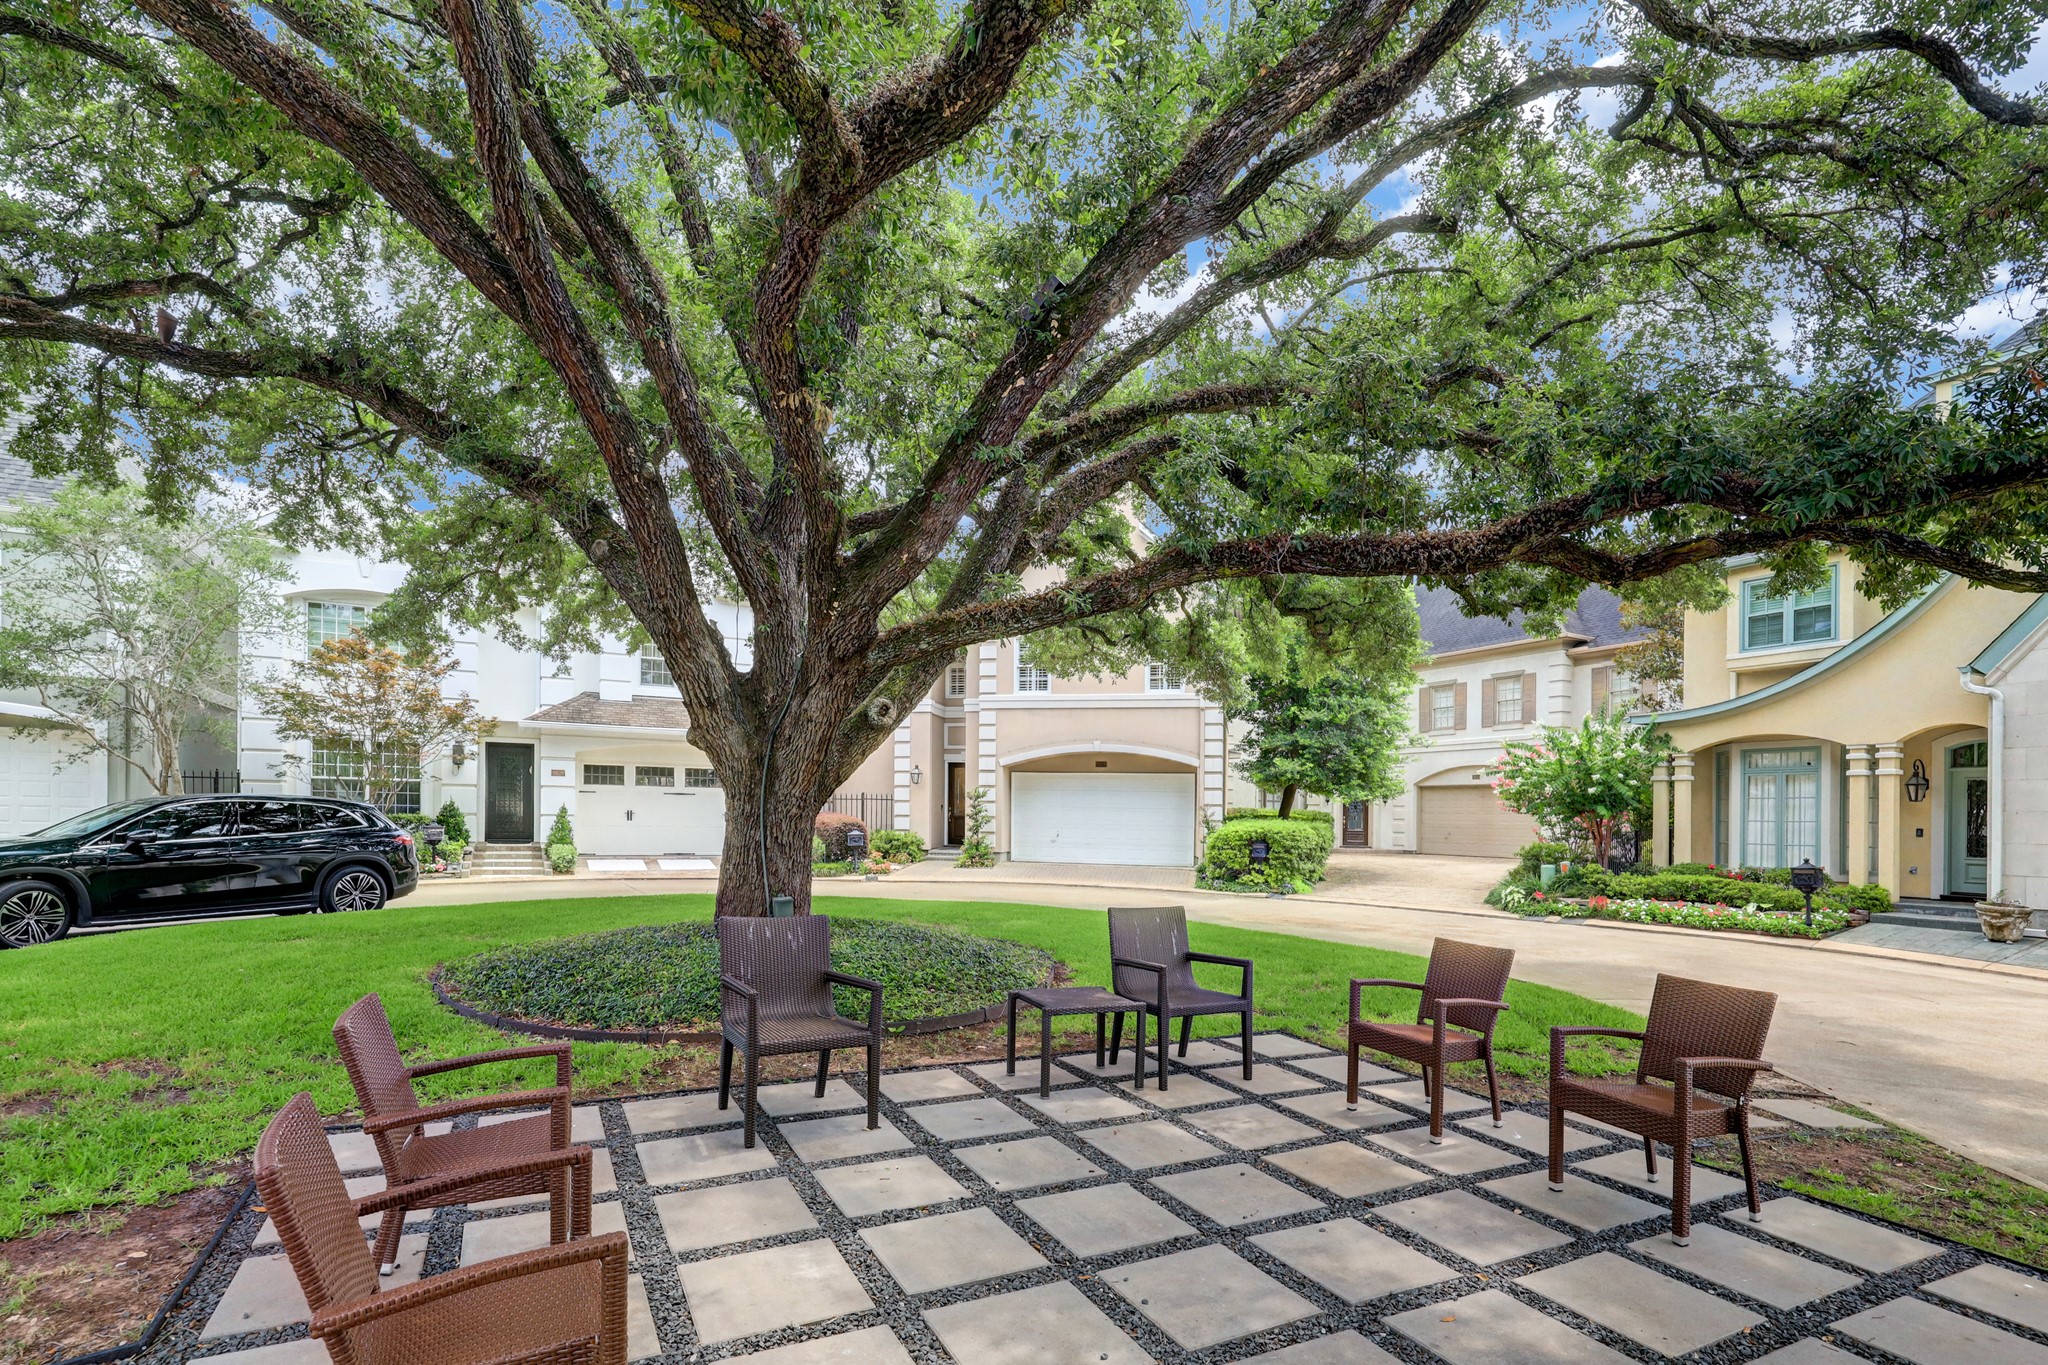 2638 Sutton Court is tucked back at the rear of the gated subdivision, offering a quiet place to reside.
